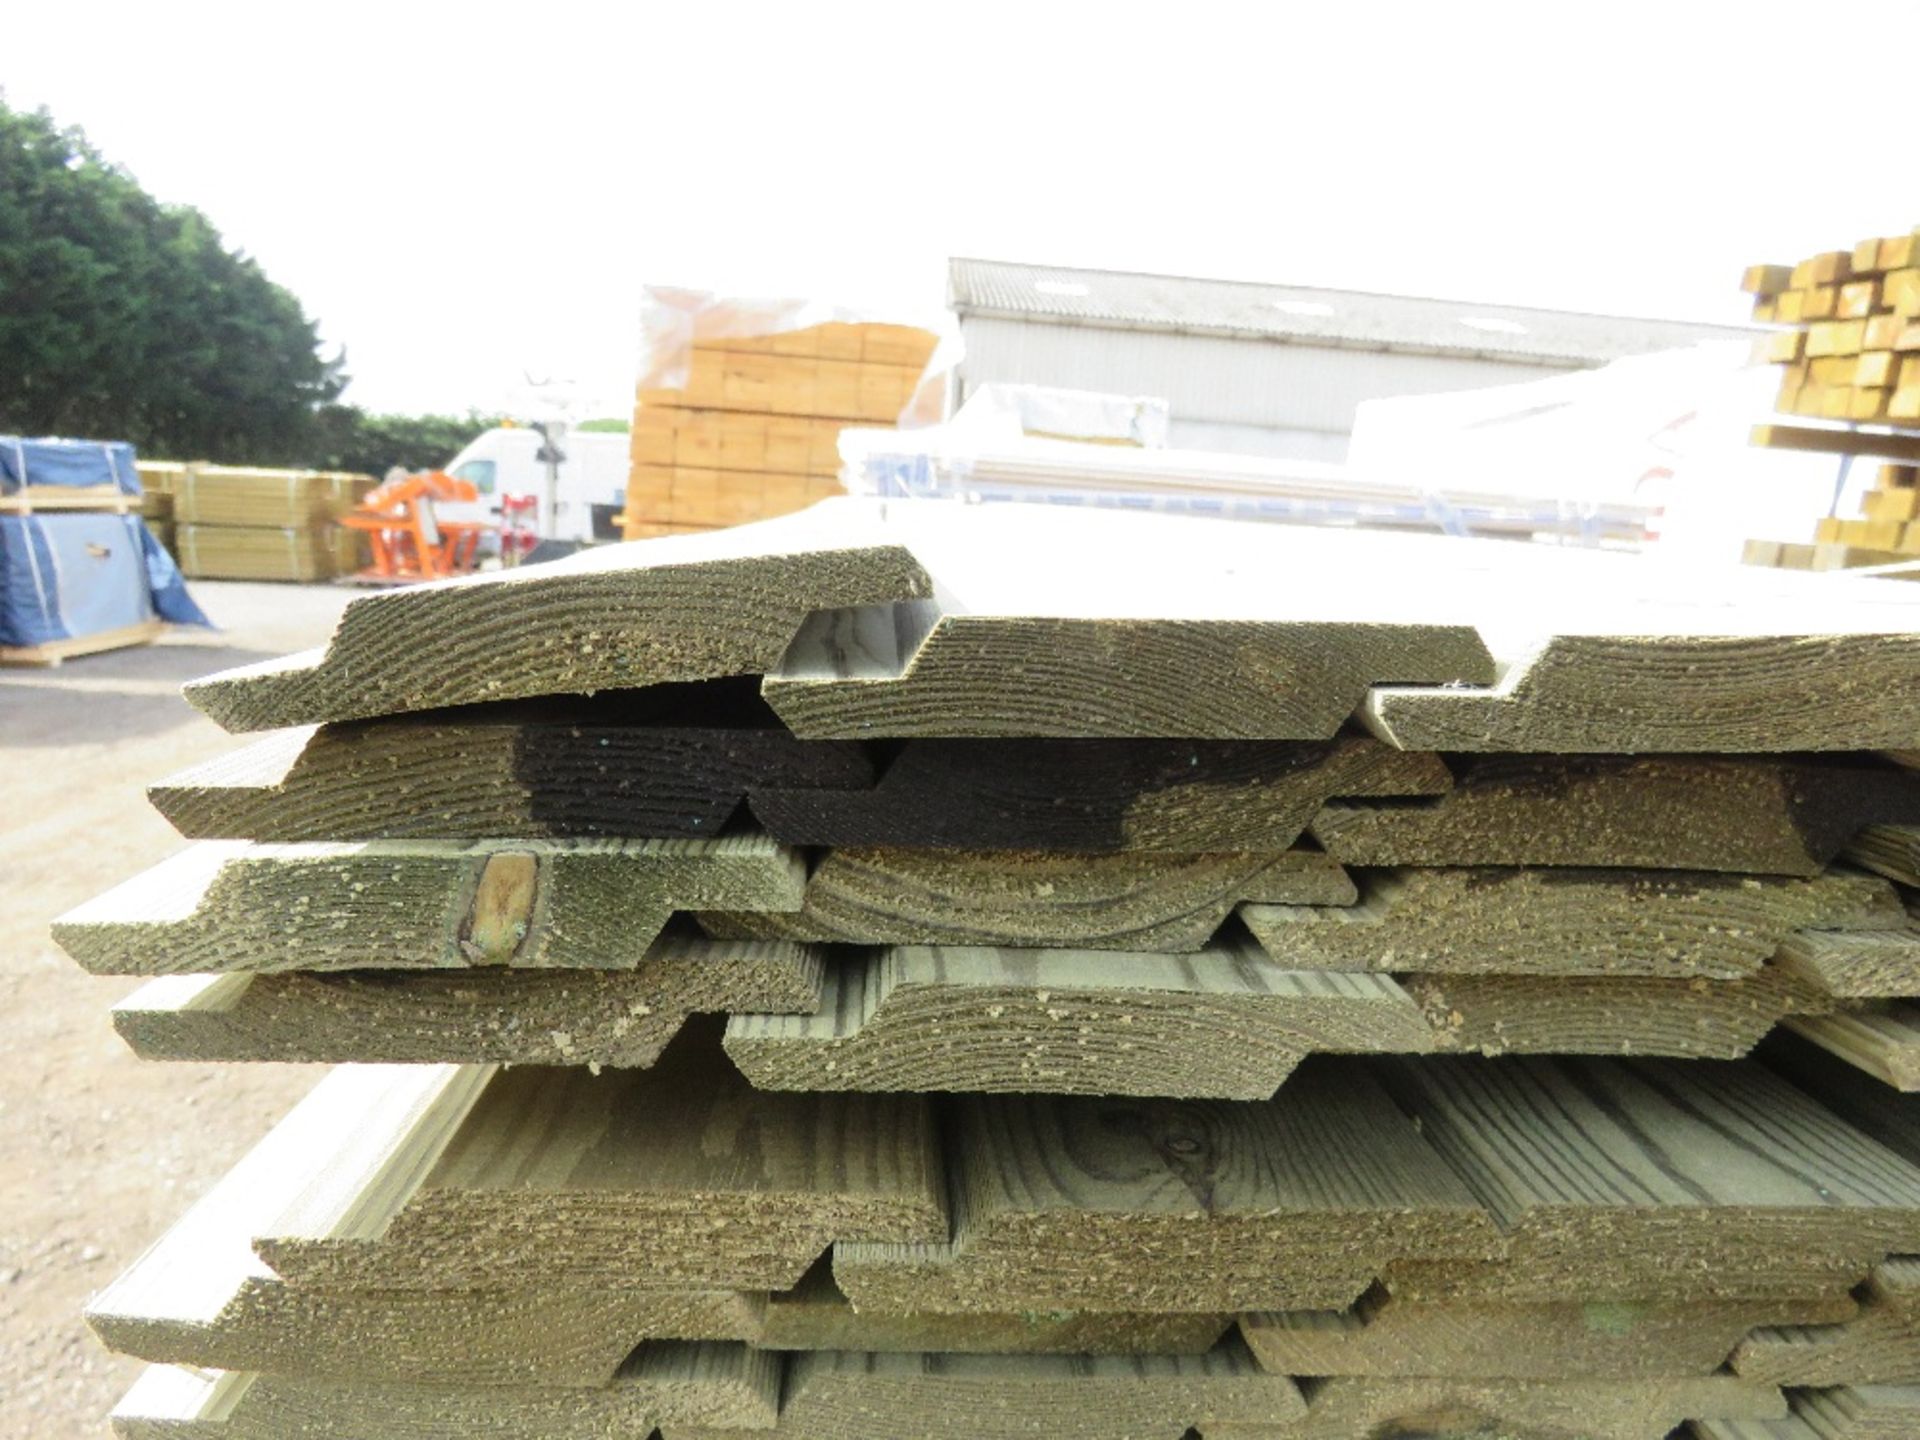 LARGE PACK OF TREATED SHIPLAP FENCE CLADDING TIMBER BAORDS 1.73M LENGTH X 100MM WIDTH APPROX. - Image 3 of 3